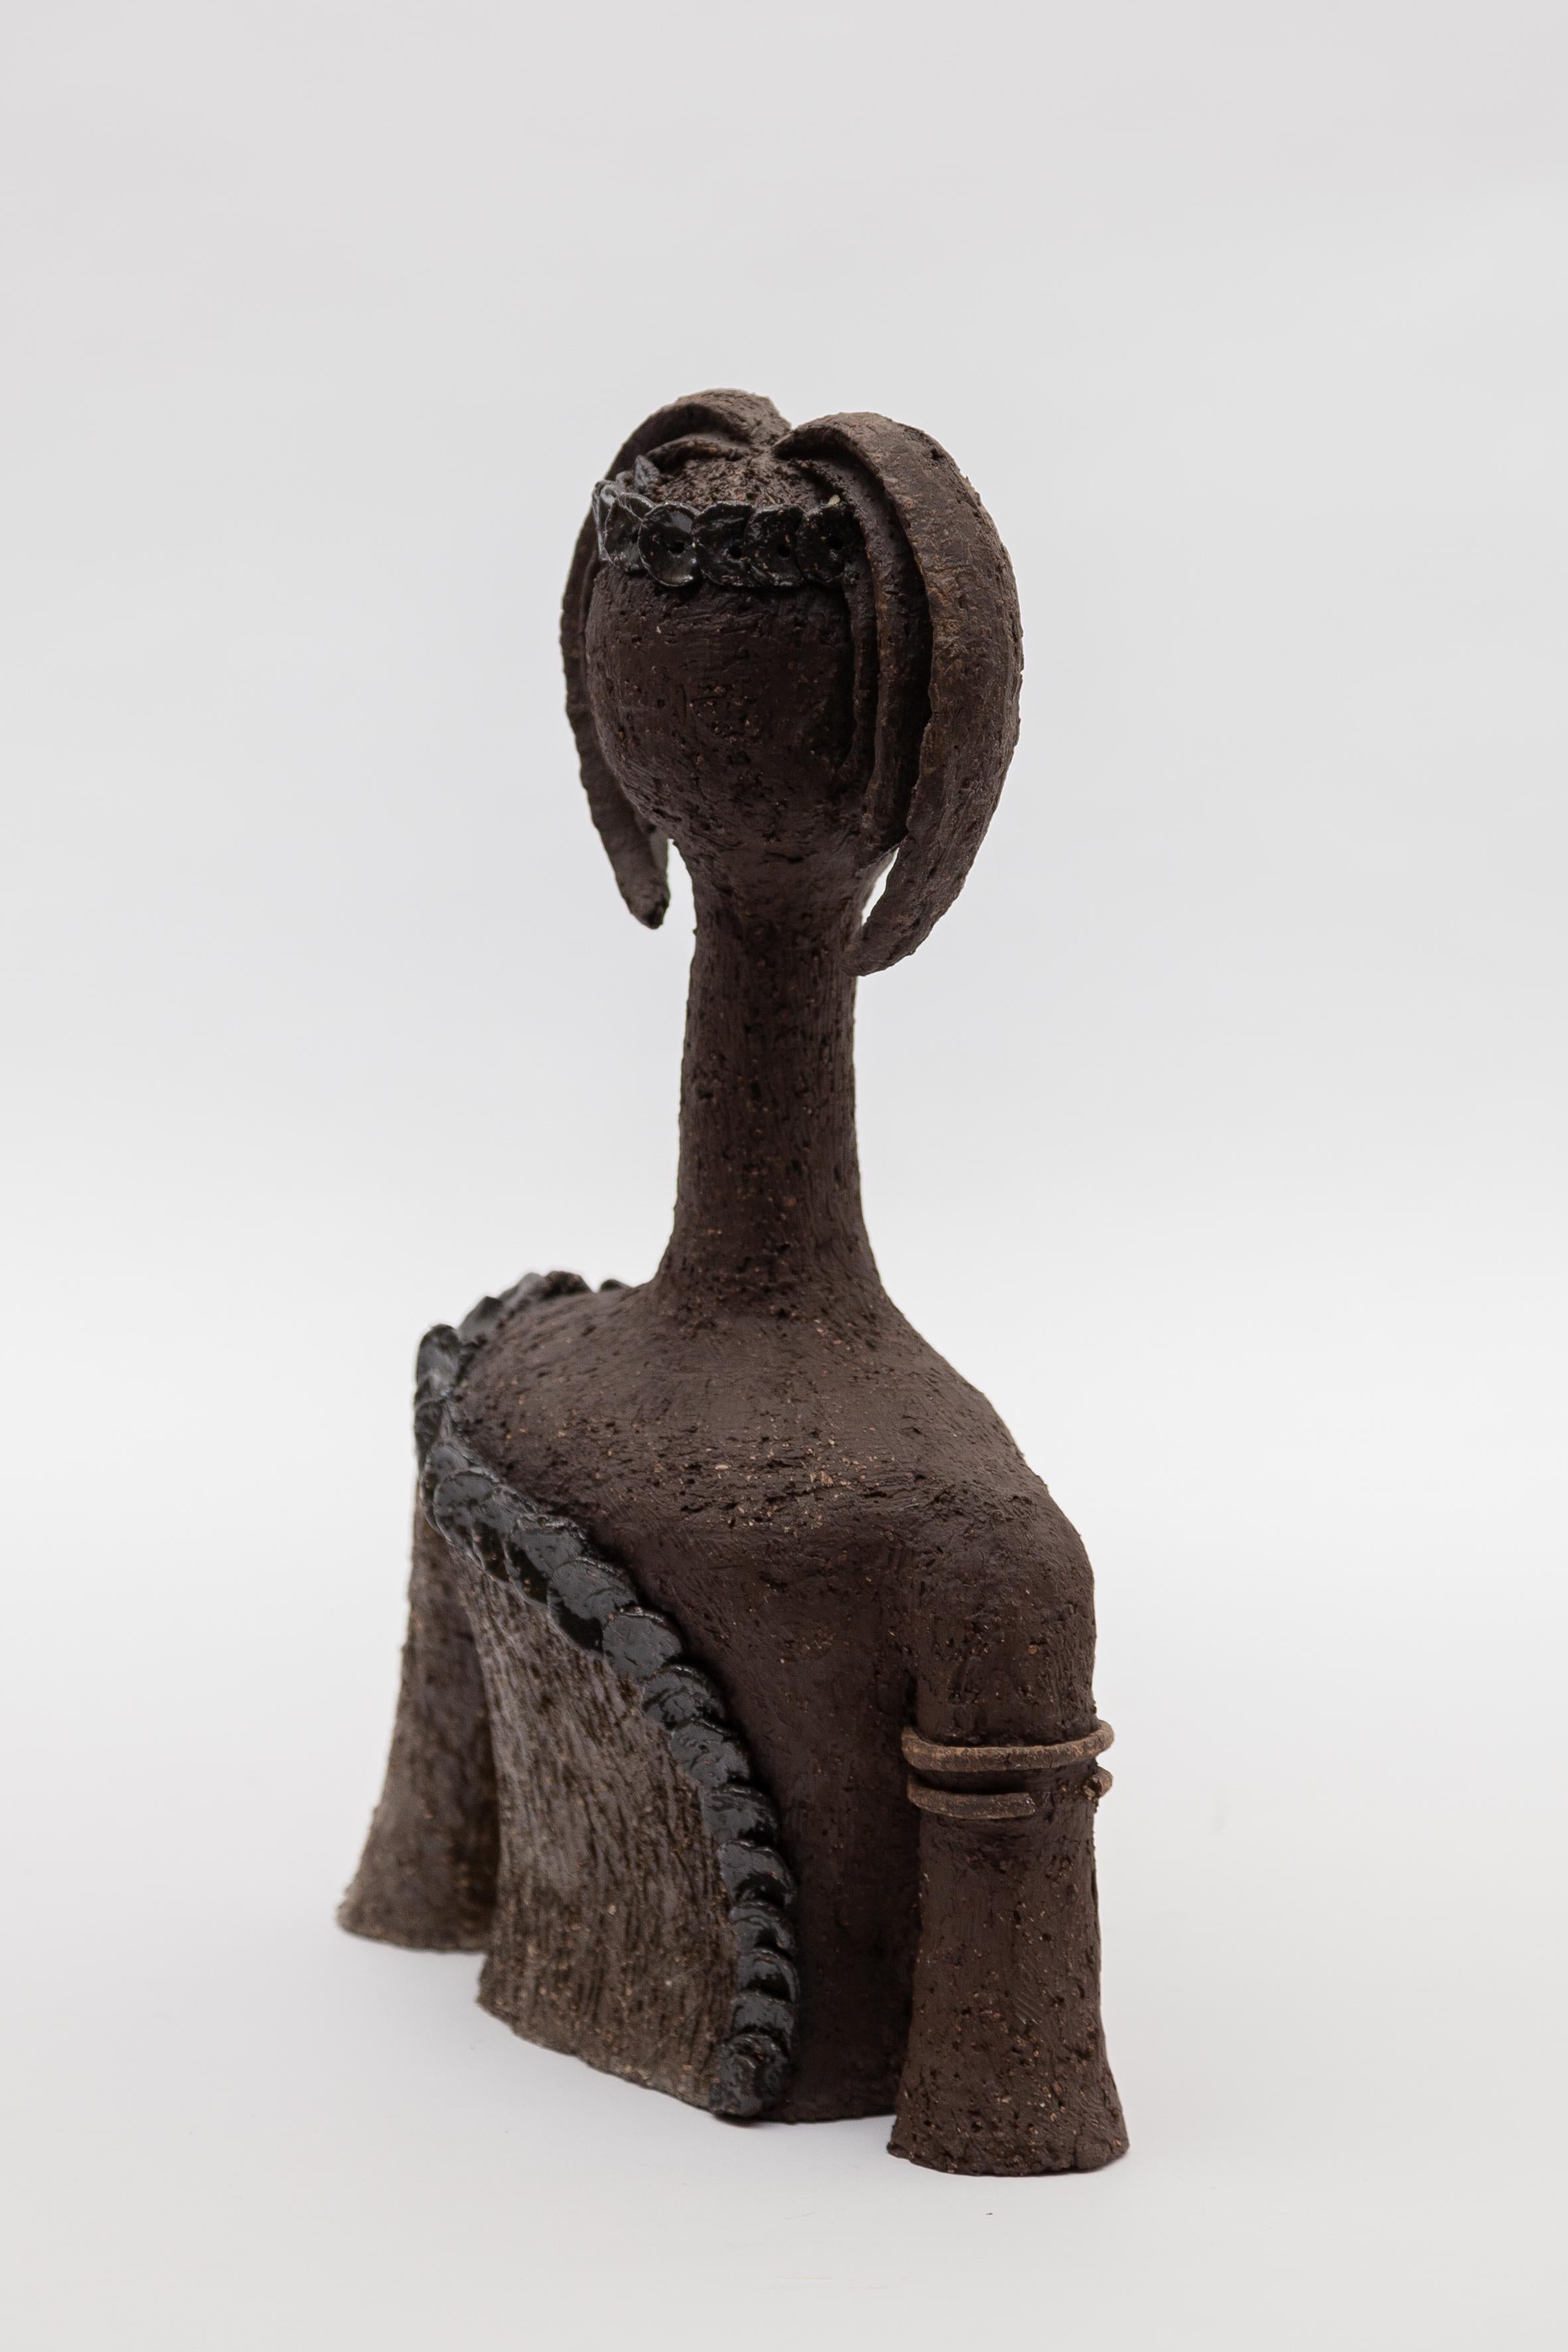 Ceramic female sculpture bust of an abstract girl, 1970s of an unknown Belgium Artist. The Bust is modeled by hand from dark coarse clay and glazed.